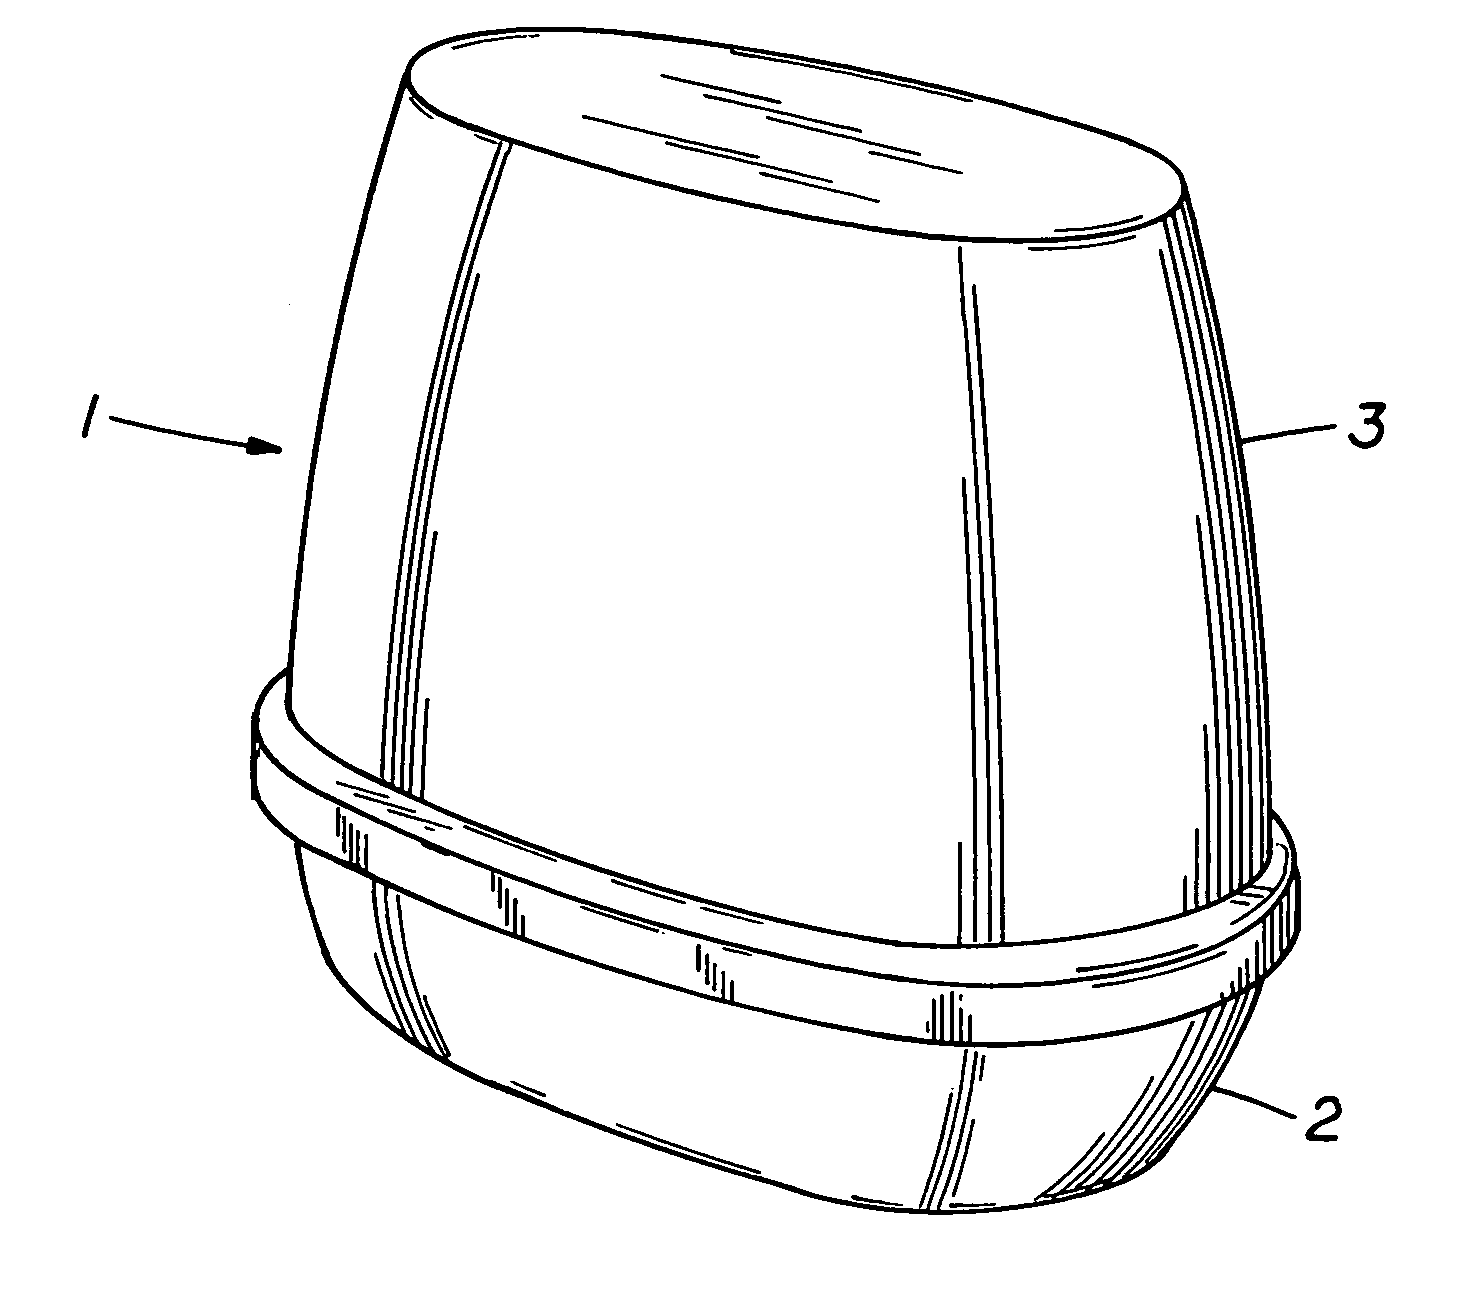 Semi-enclosed gel delivery device